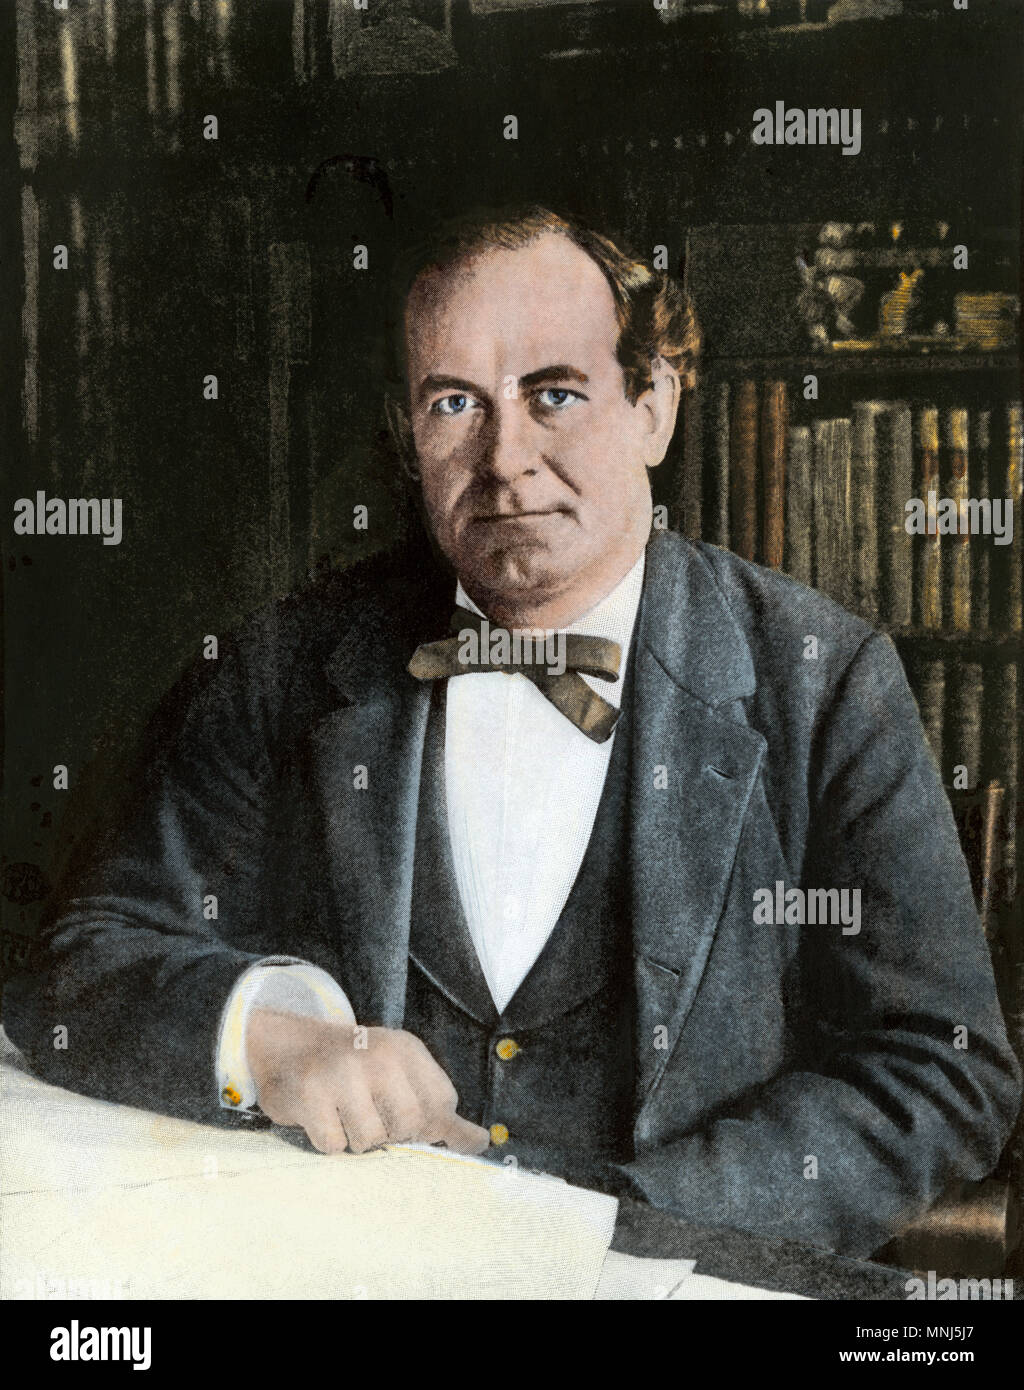 William Jennings Bryan, about 1890, in Lincoln, Nebraska. Hand-colored halftone of a photograph Stock Photo